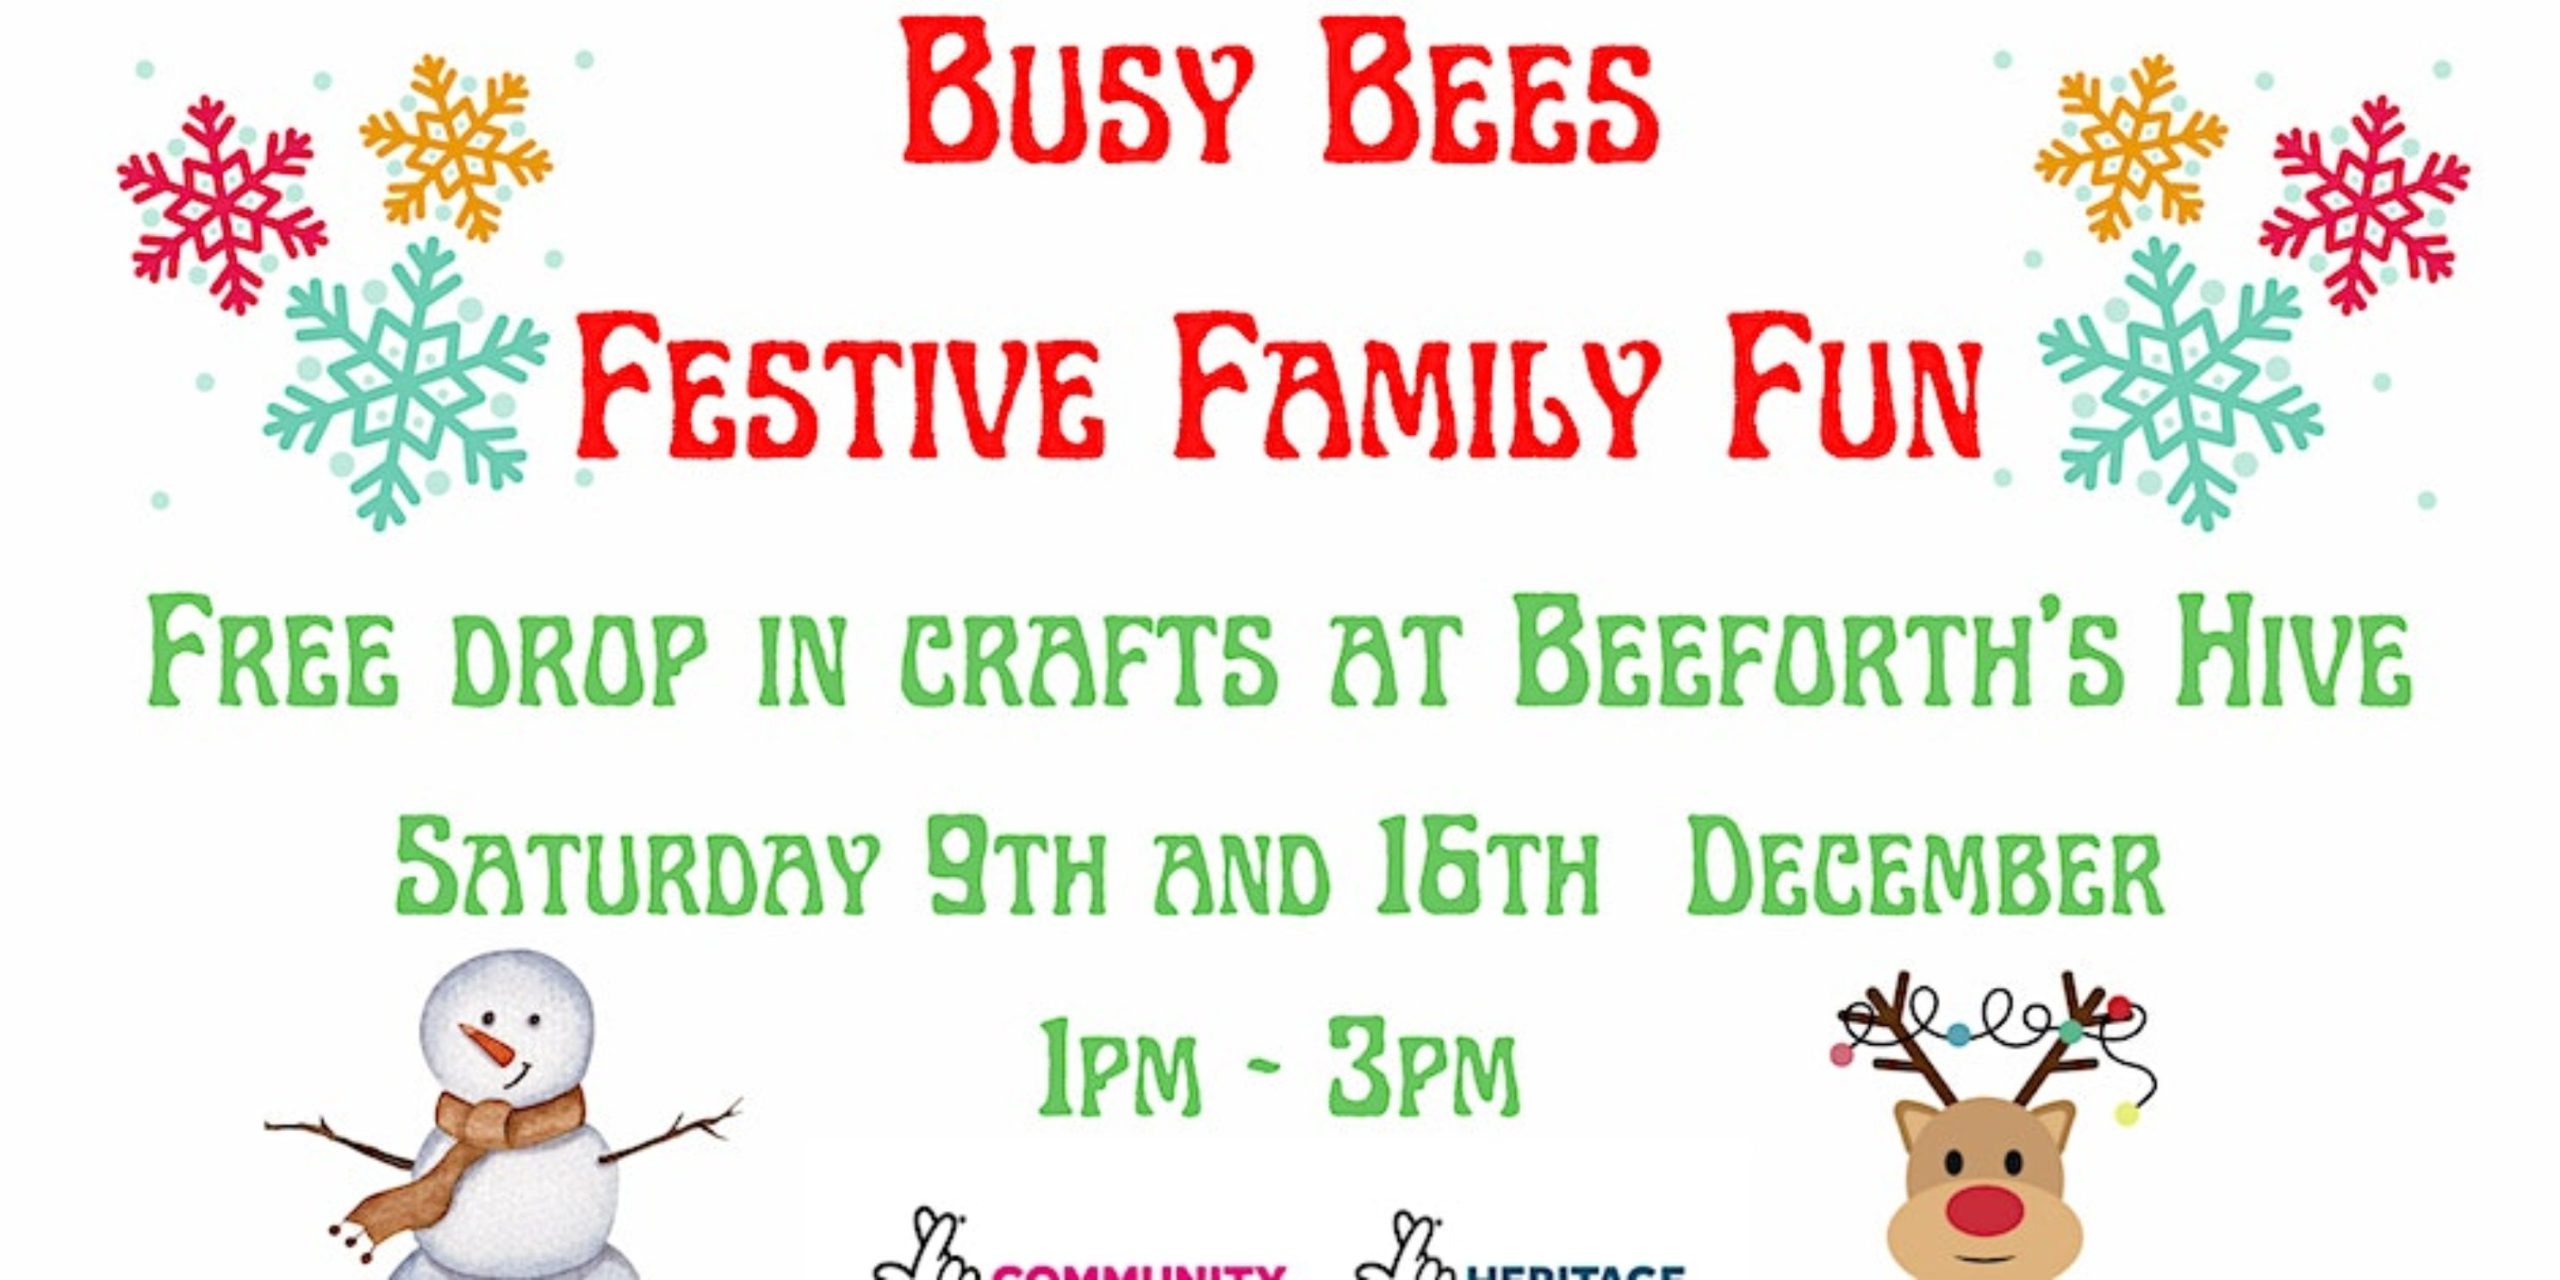 Busy Bees Festive Family Fun at Beeforth's Hive